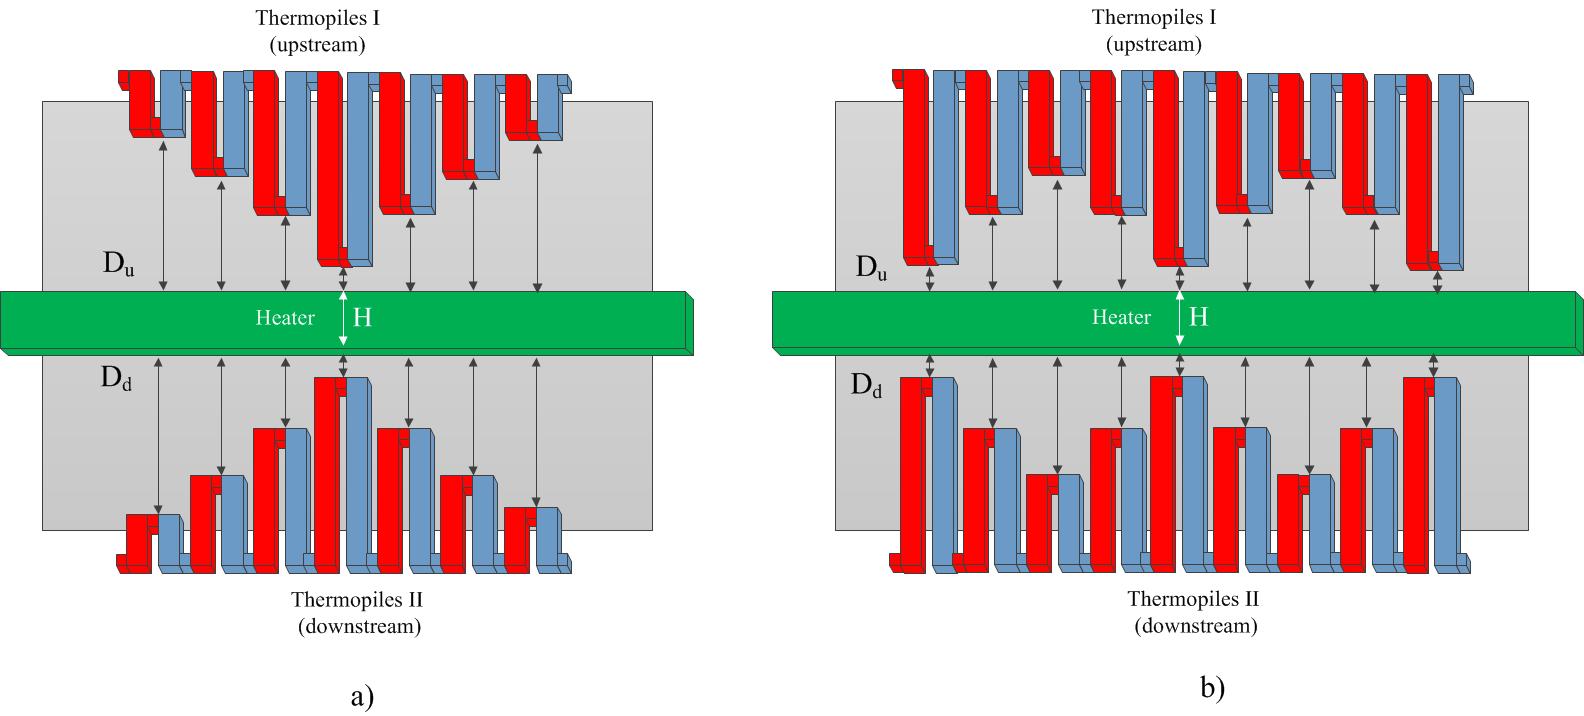 Novel designs of thermopile for mass flowmeter (a), (b).